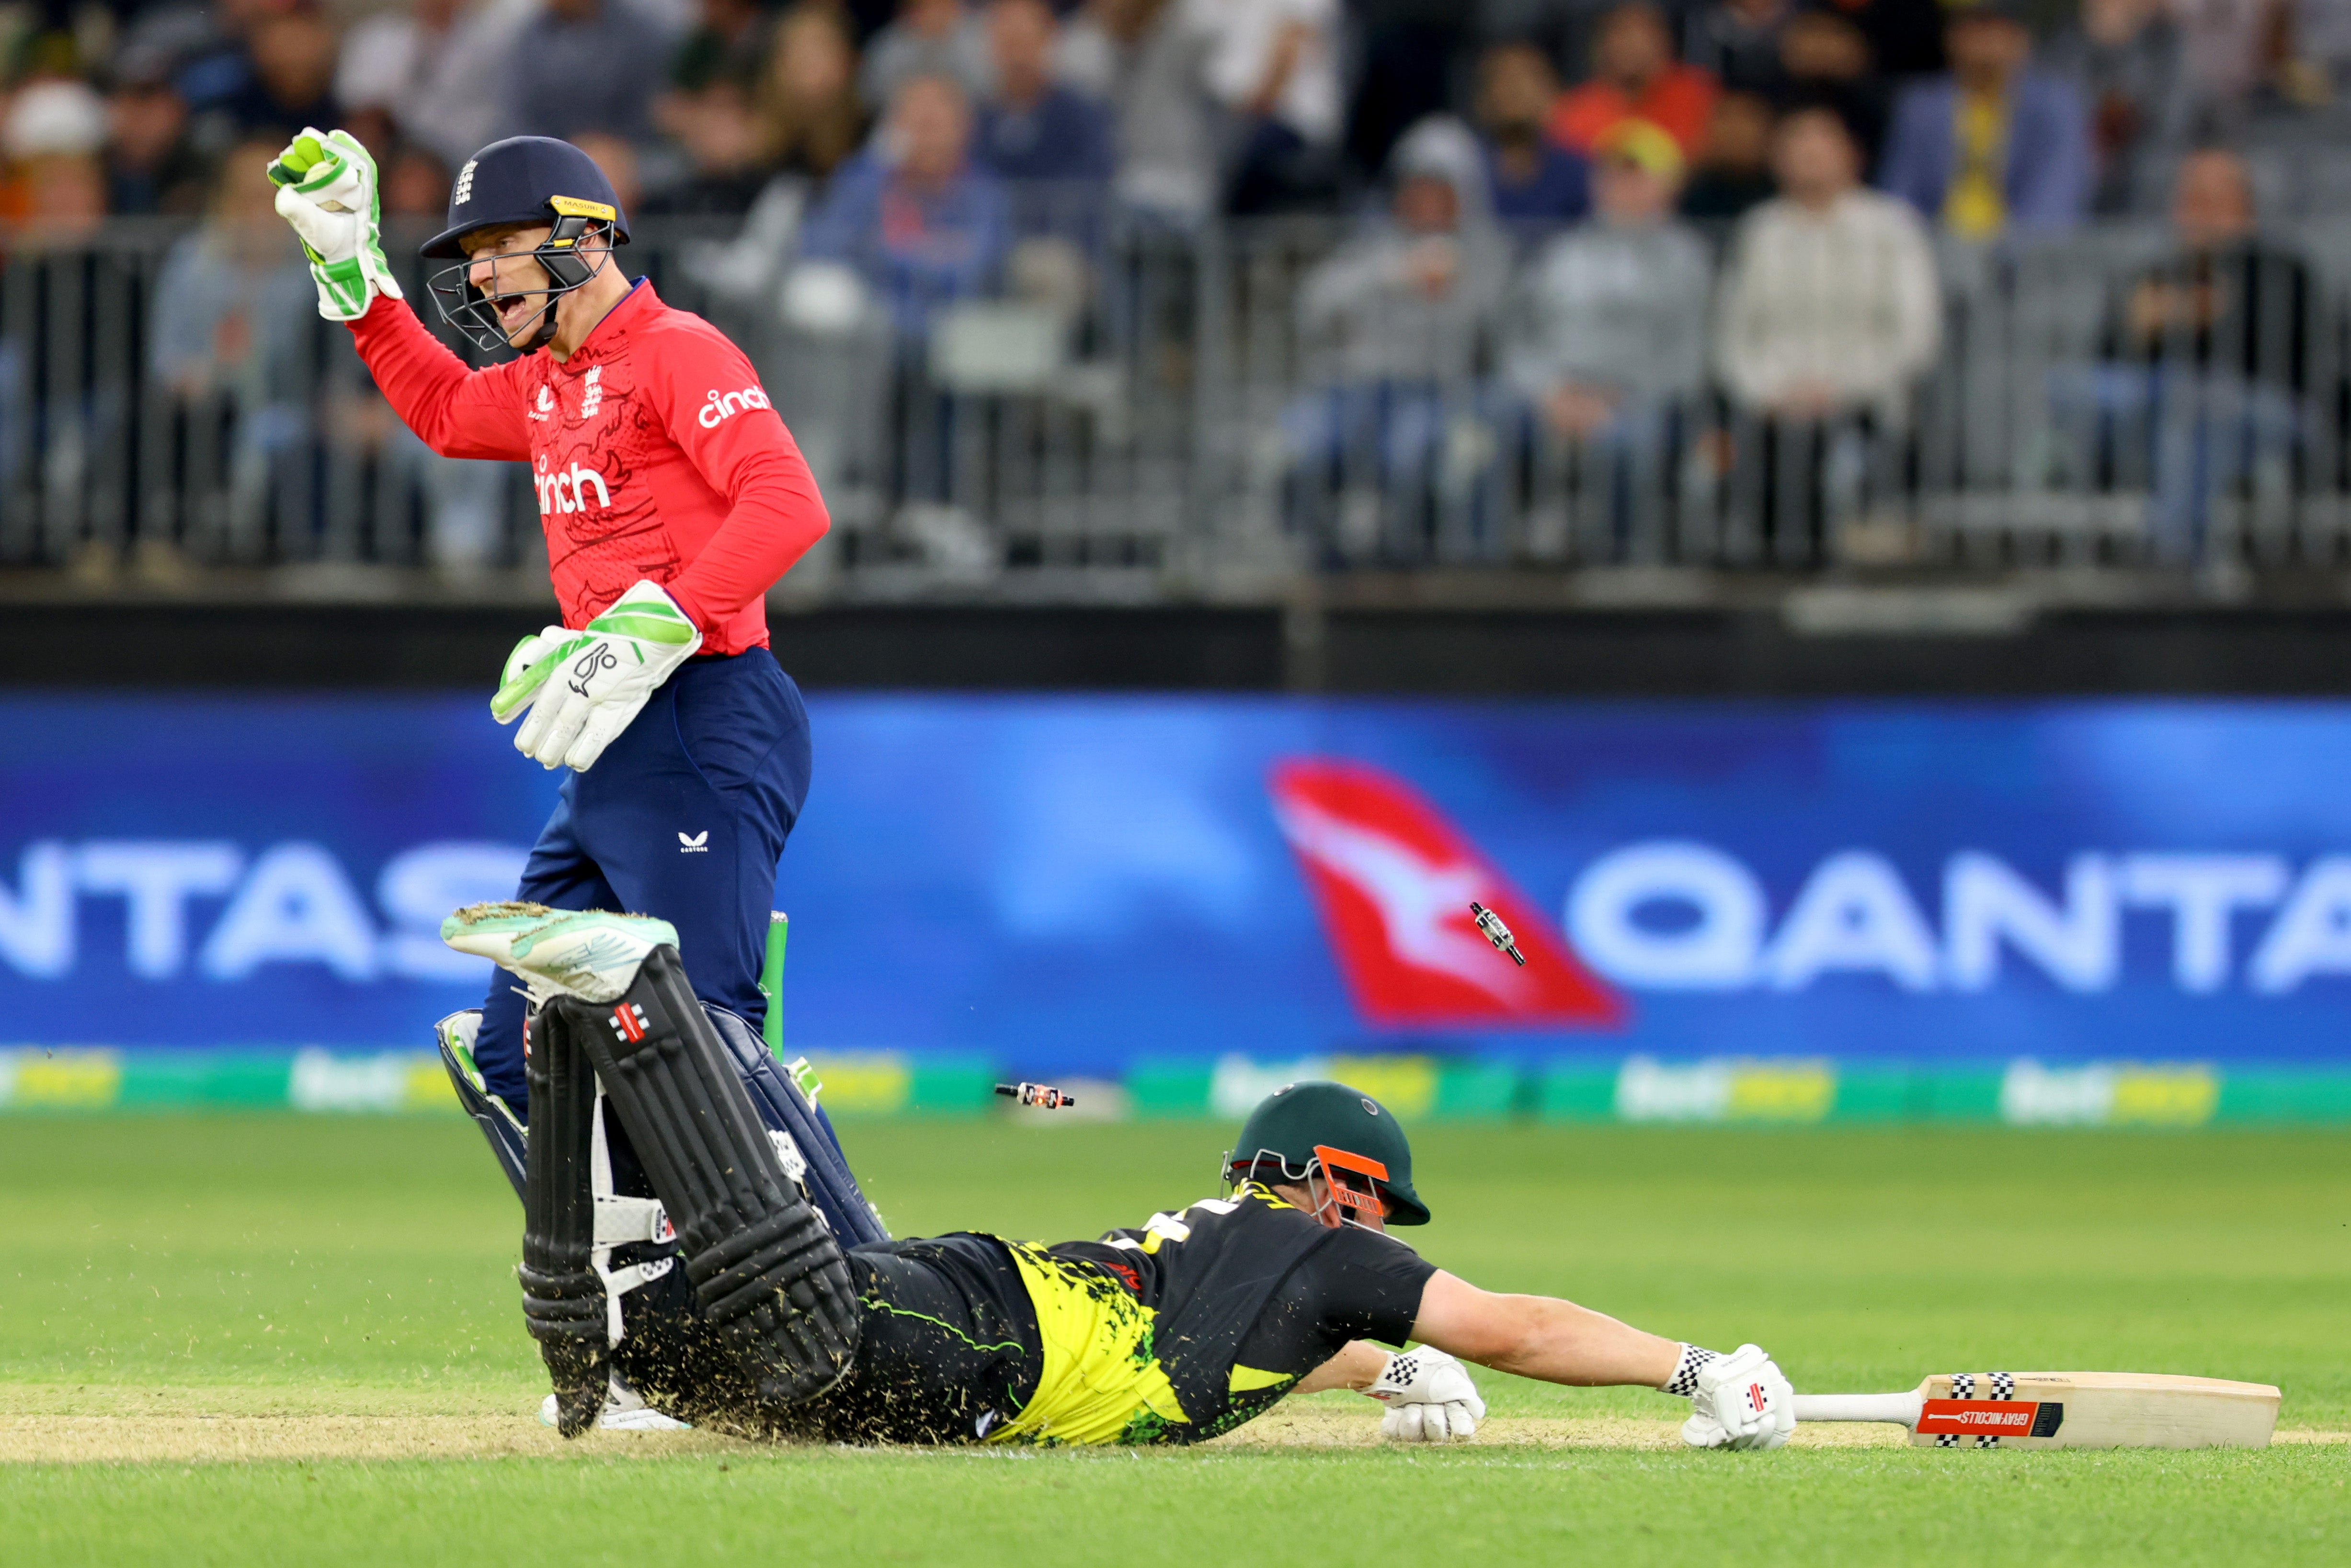 England vs Australia live stream How to watch T20 World Cup fixture